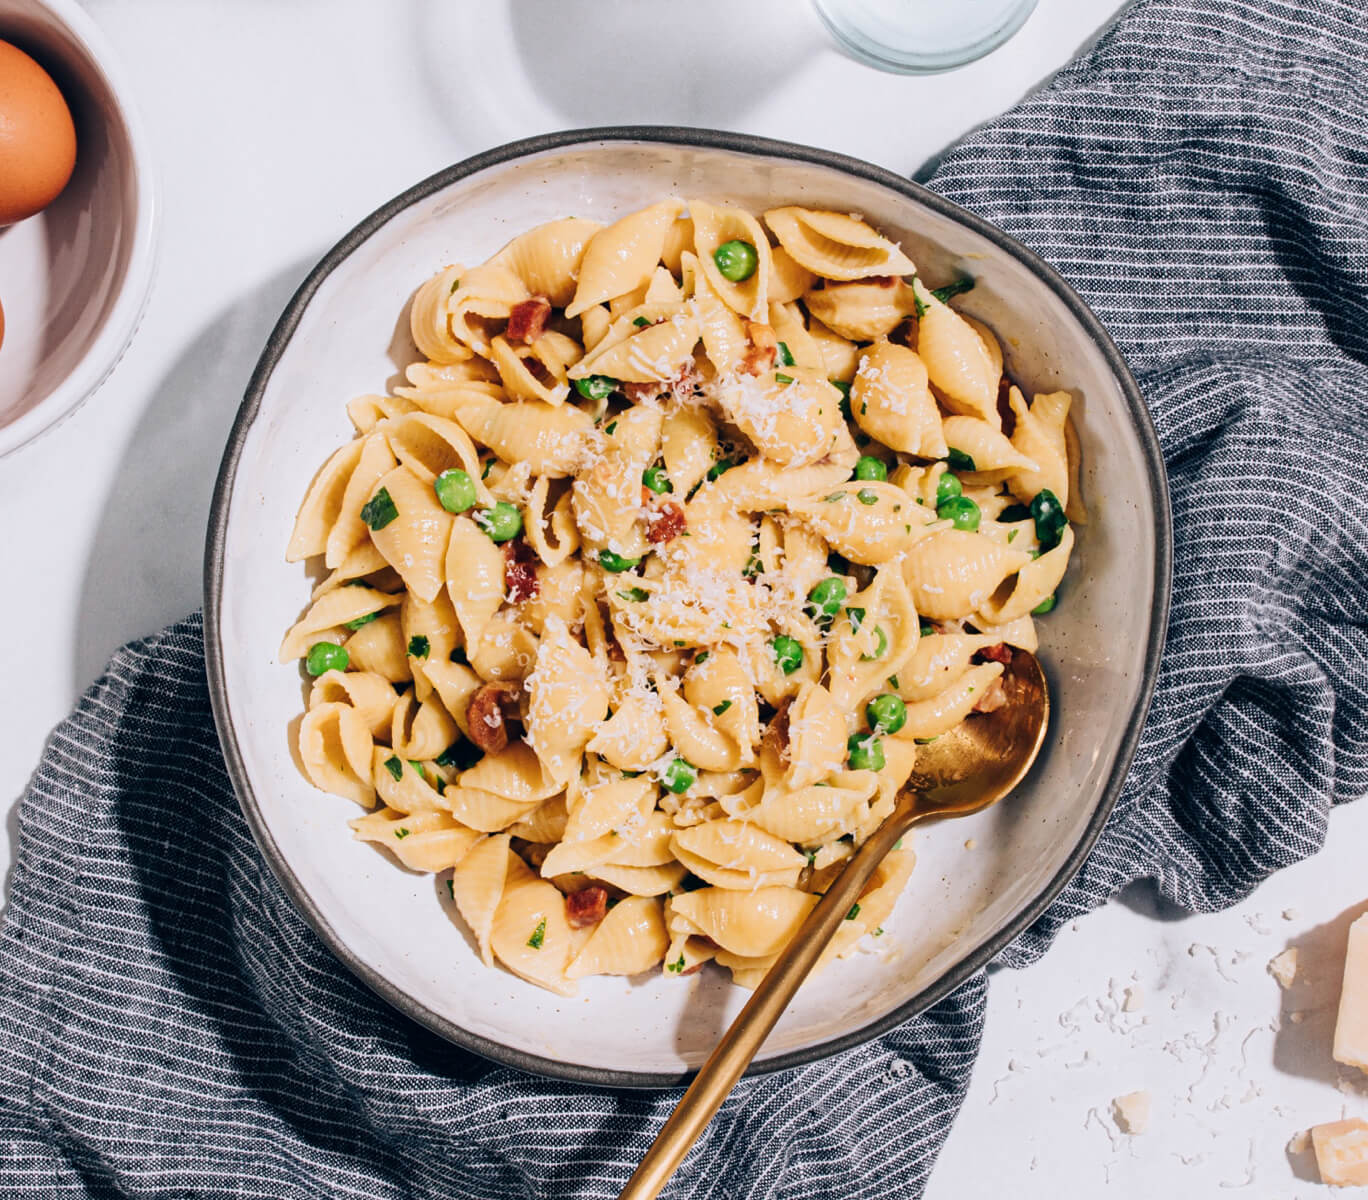 Ronzoni’s Carbonara Pasta Salad with Shells and Peas, a lighter twist on a traditionally heavy dish